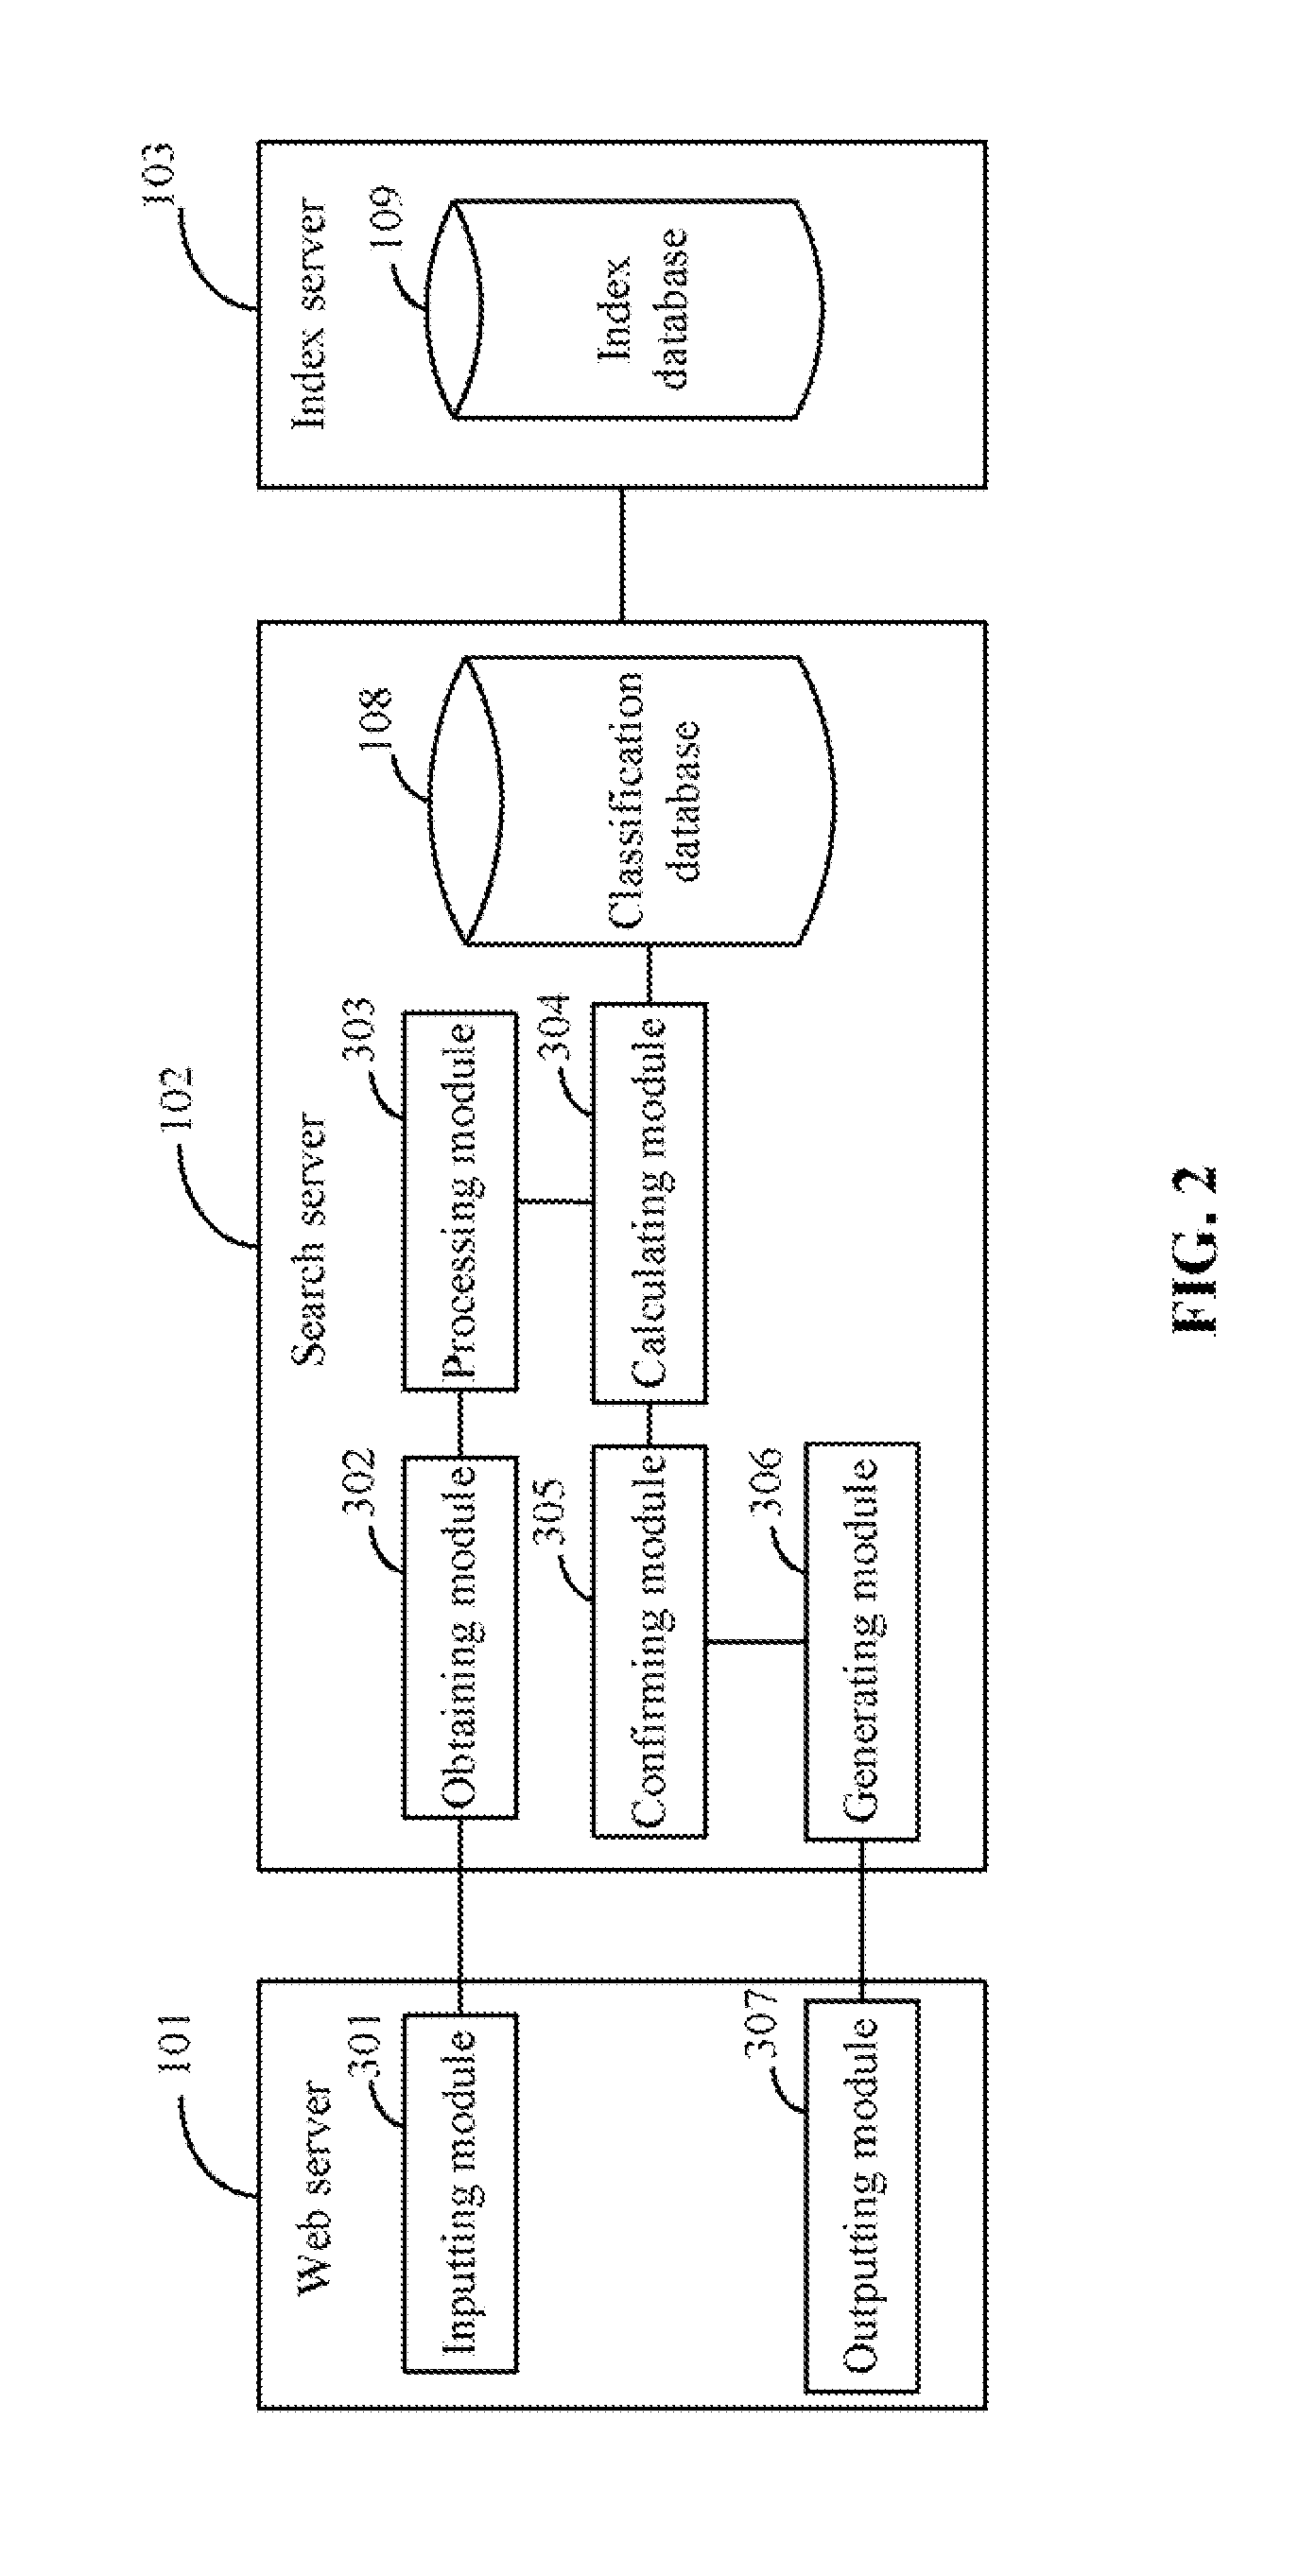 System and method for searching information and displaying search results